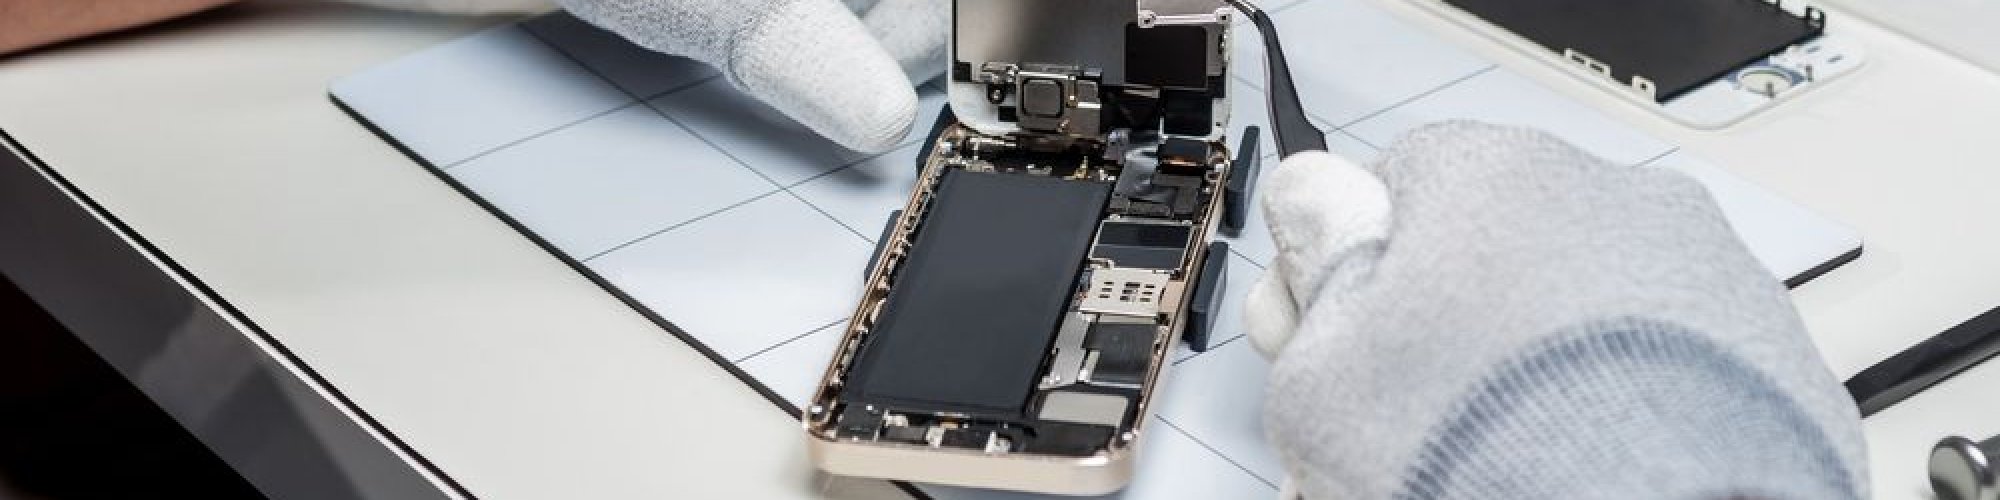 S & J Electronics and Cellphone Repair